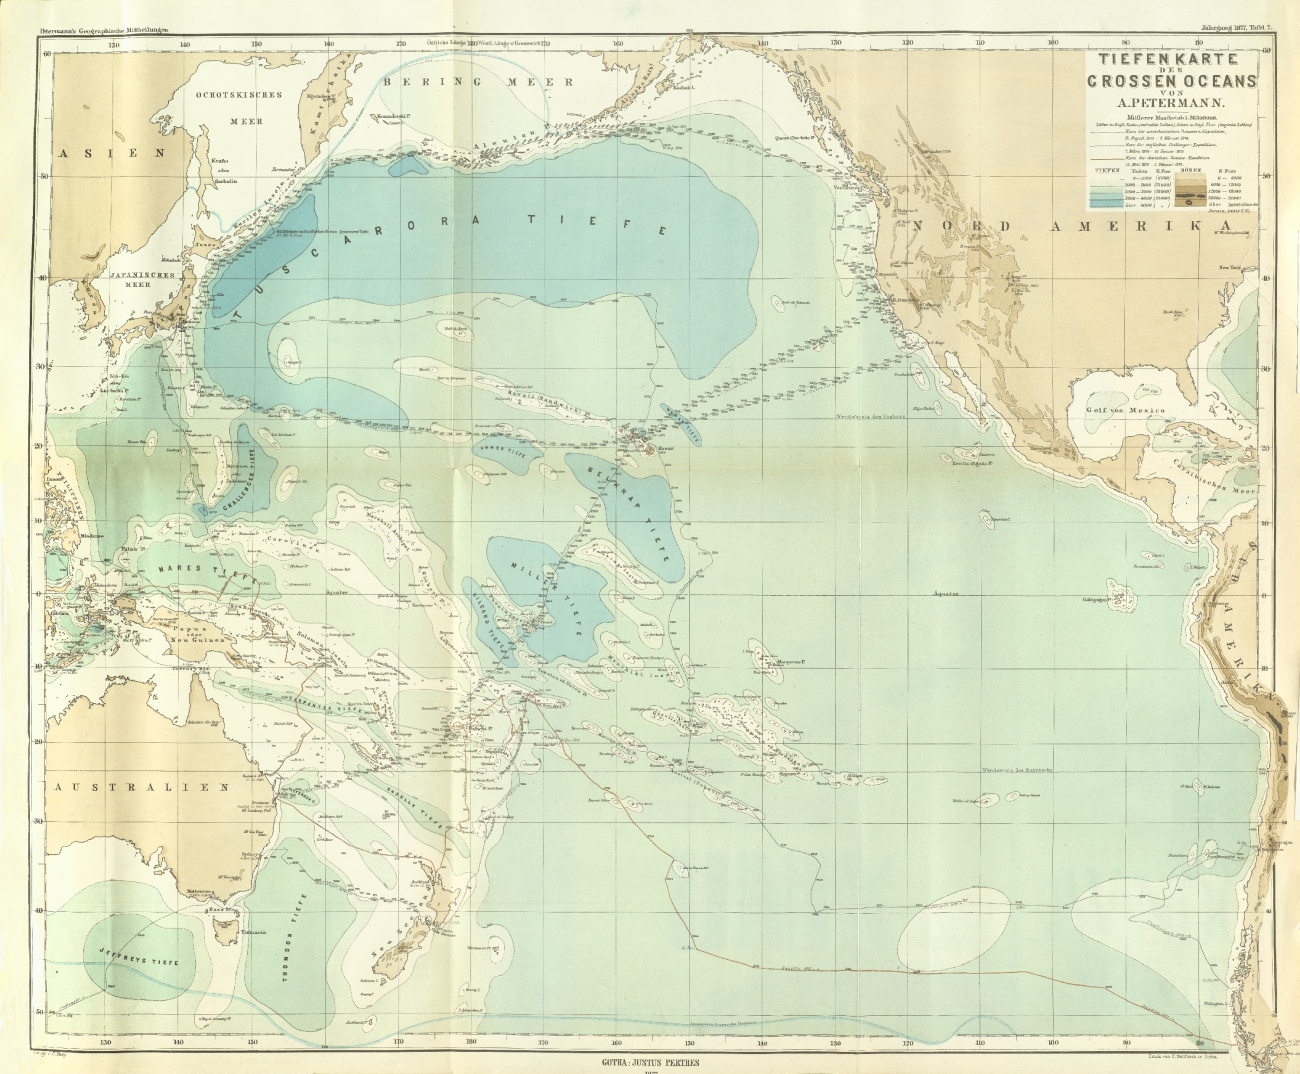 This map, by Augustus Petermann, was the first bathymetric map of thePacific Ocean